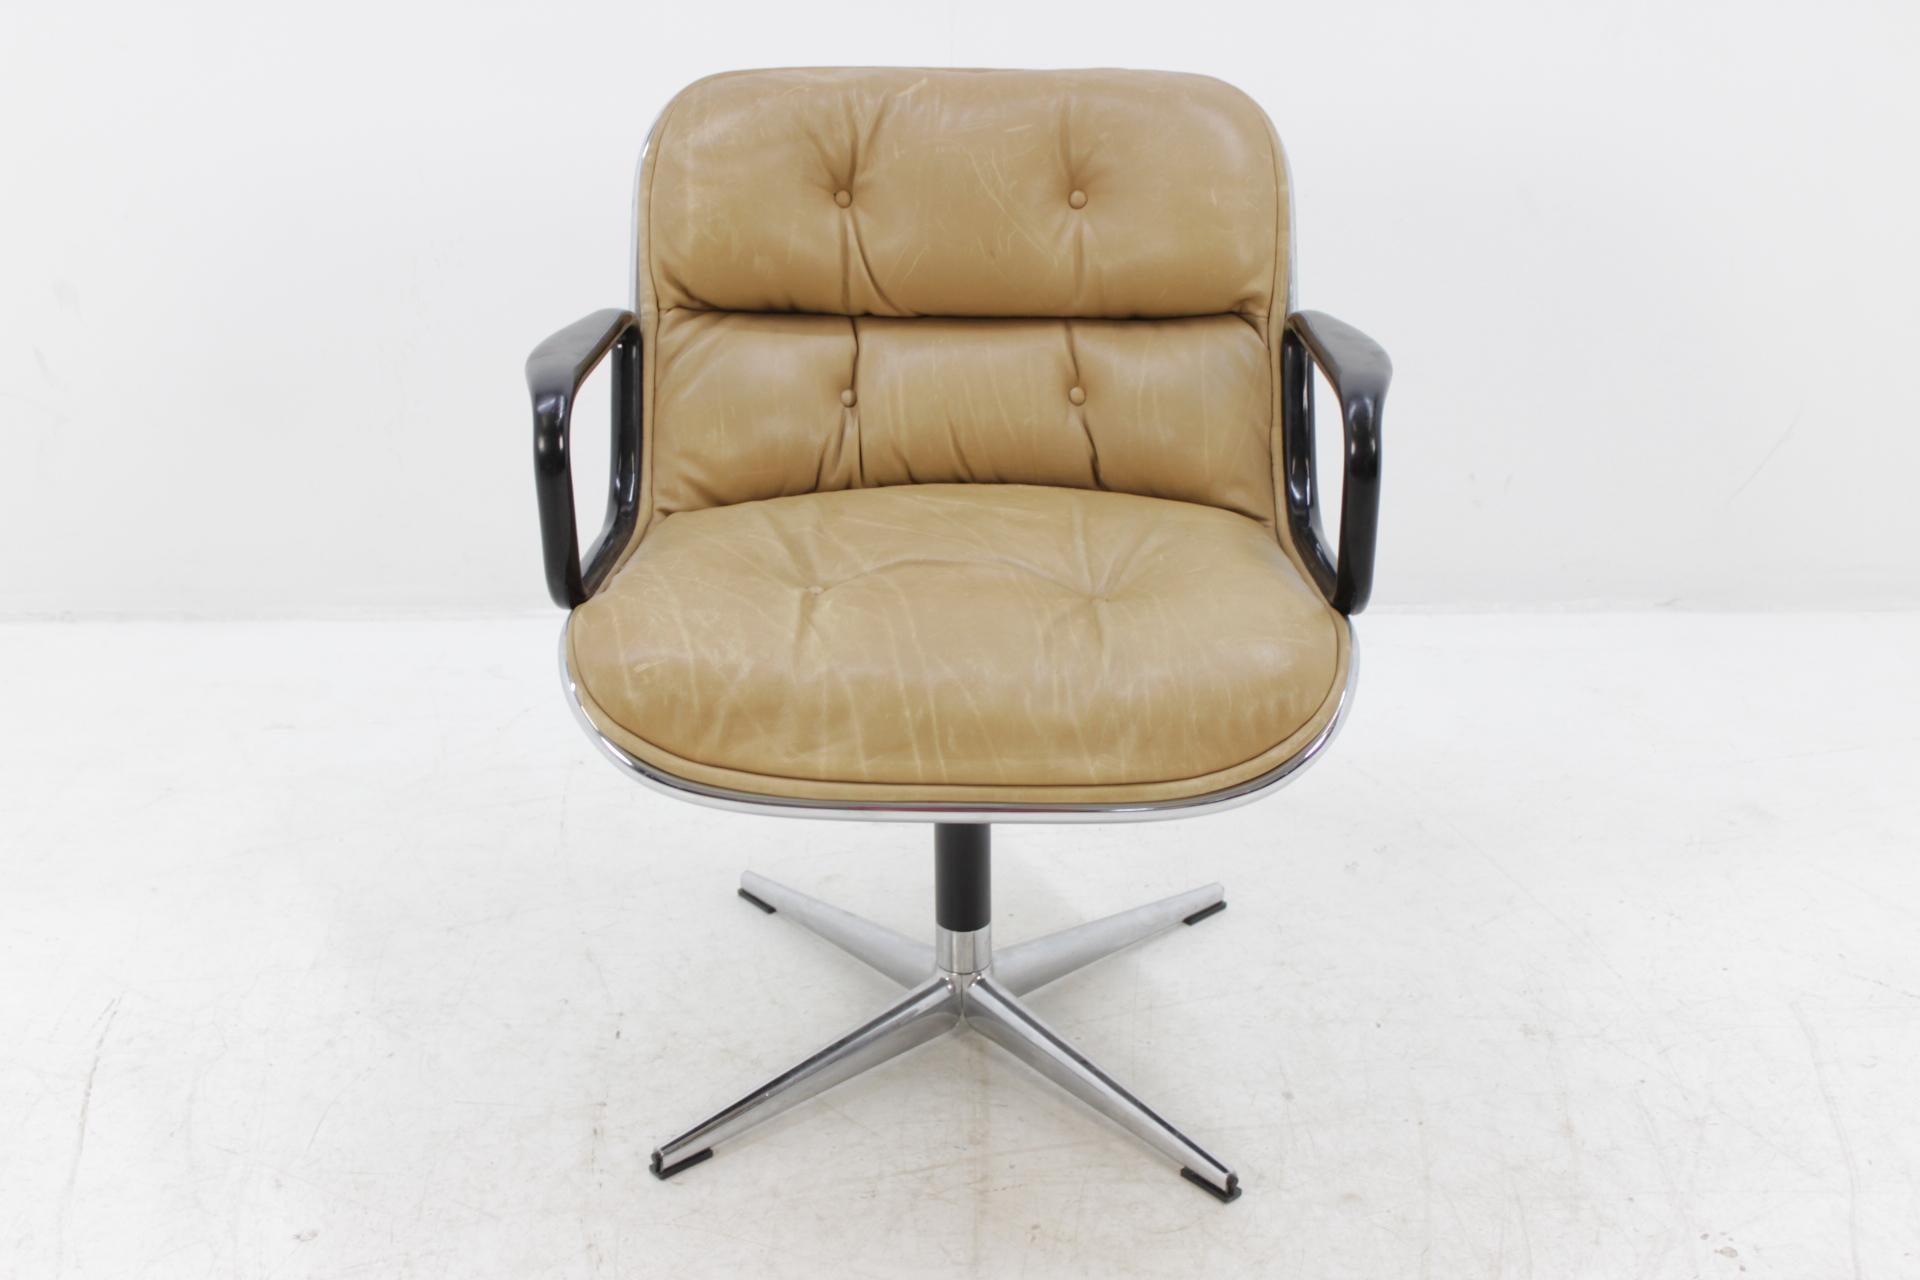 Late 20th Century Midcentury Leather Swivel Chair Designed by Charles Pollock, 1970s